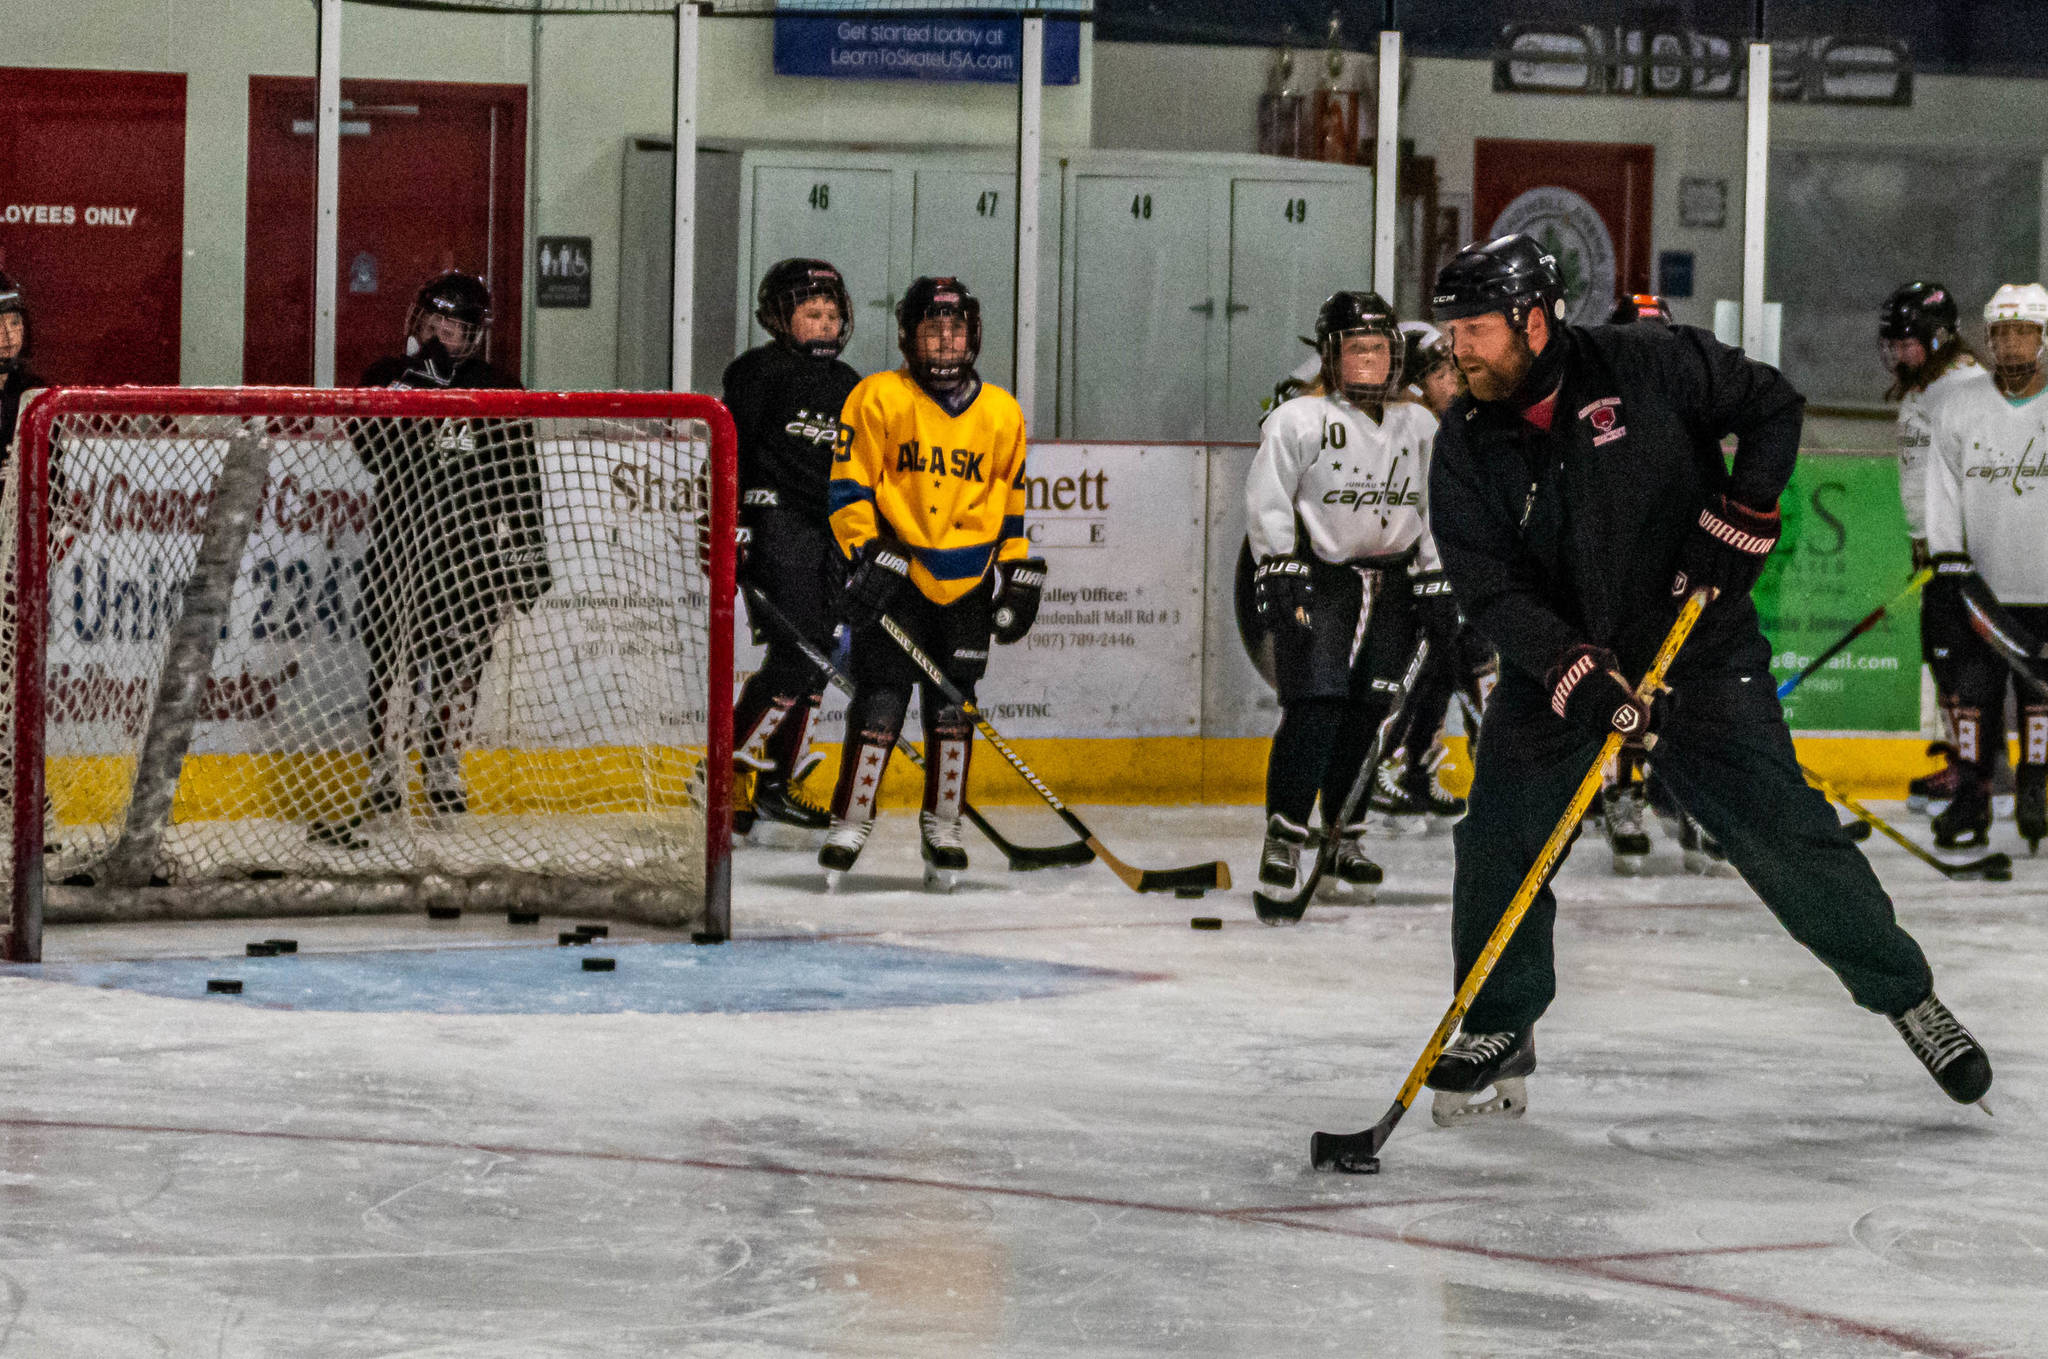 Matt Boline demonstrates a drill during a recent workout with players in the 12-and-under group workout at Treadwell Ice Arena. (Courtesy Photo / Steve Quinn)